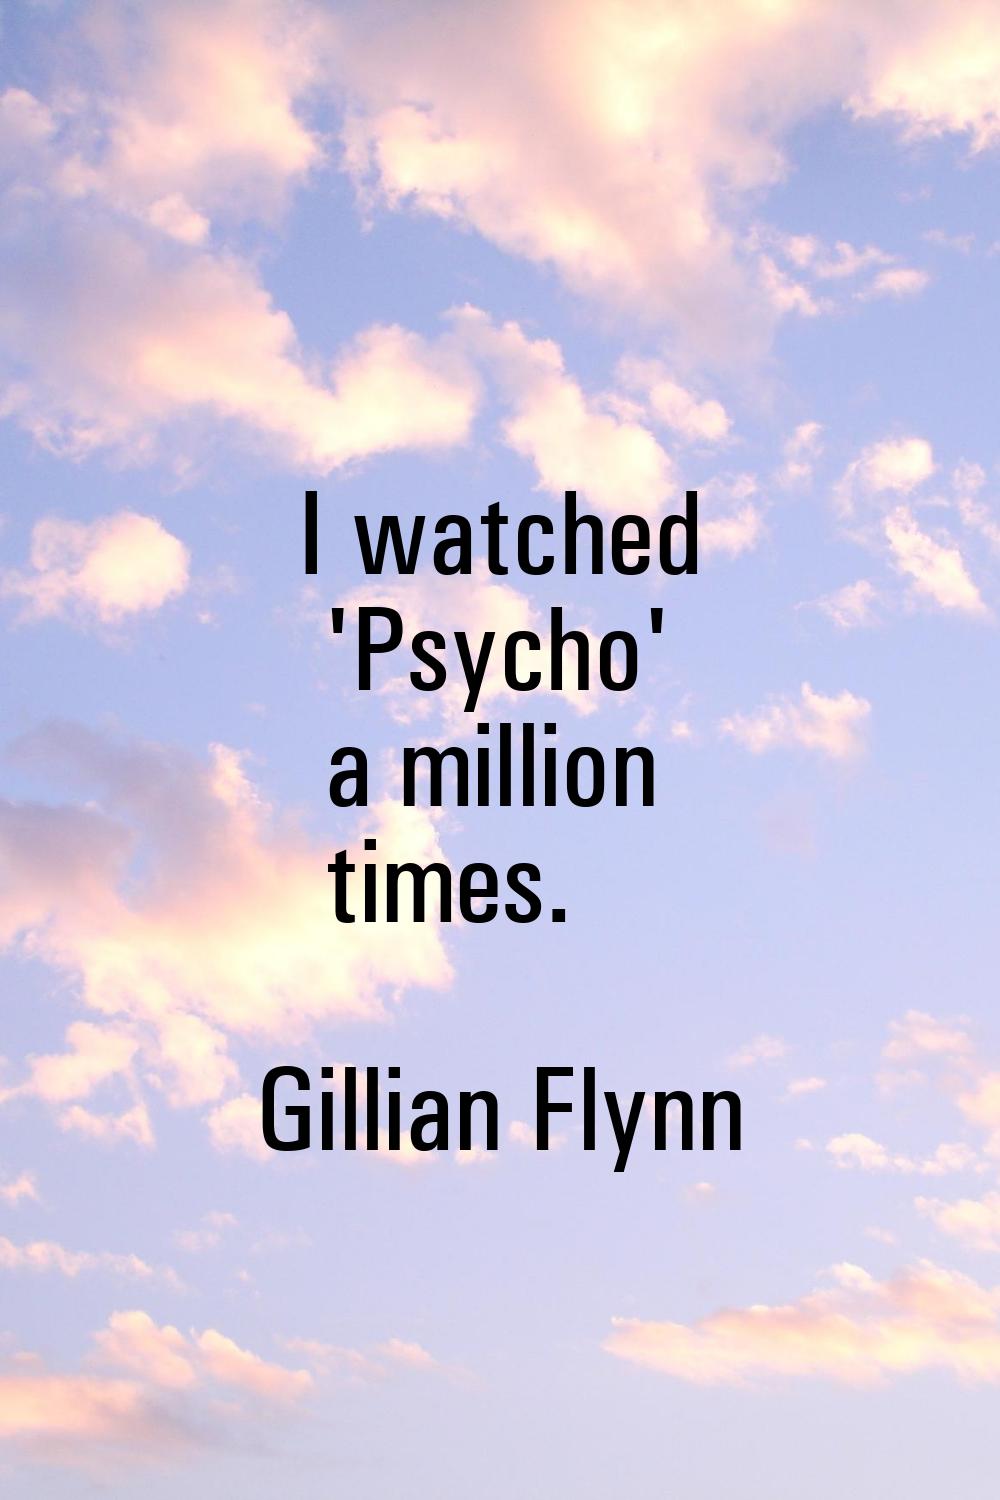 I watched 'Psycho' a million times.